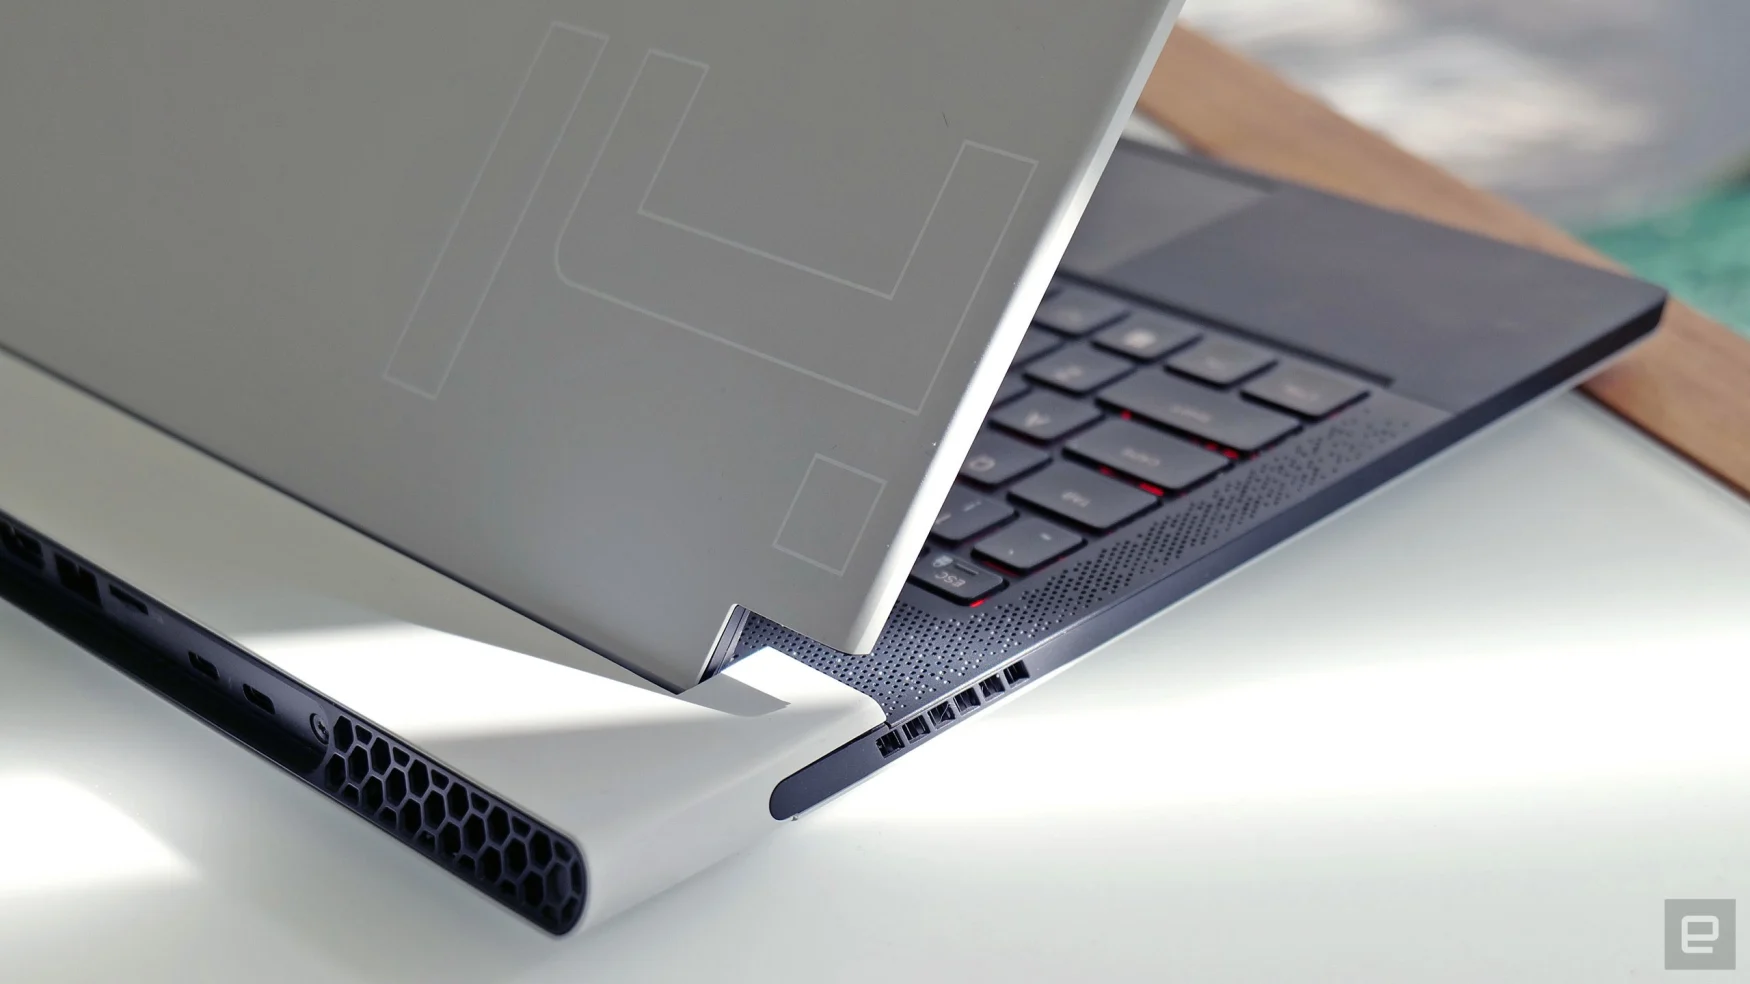 Alienware's new dual-torque hinge for the x14 helps increase screen stability white reducing excess size and weight. 